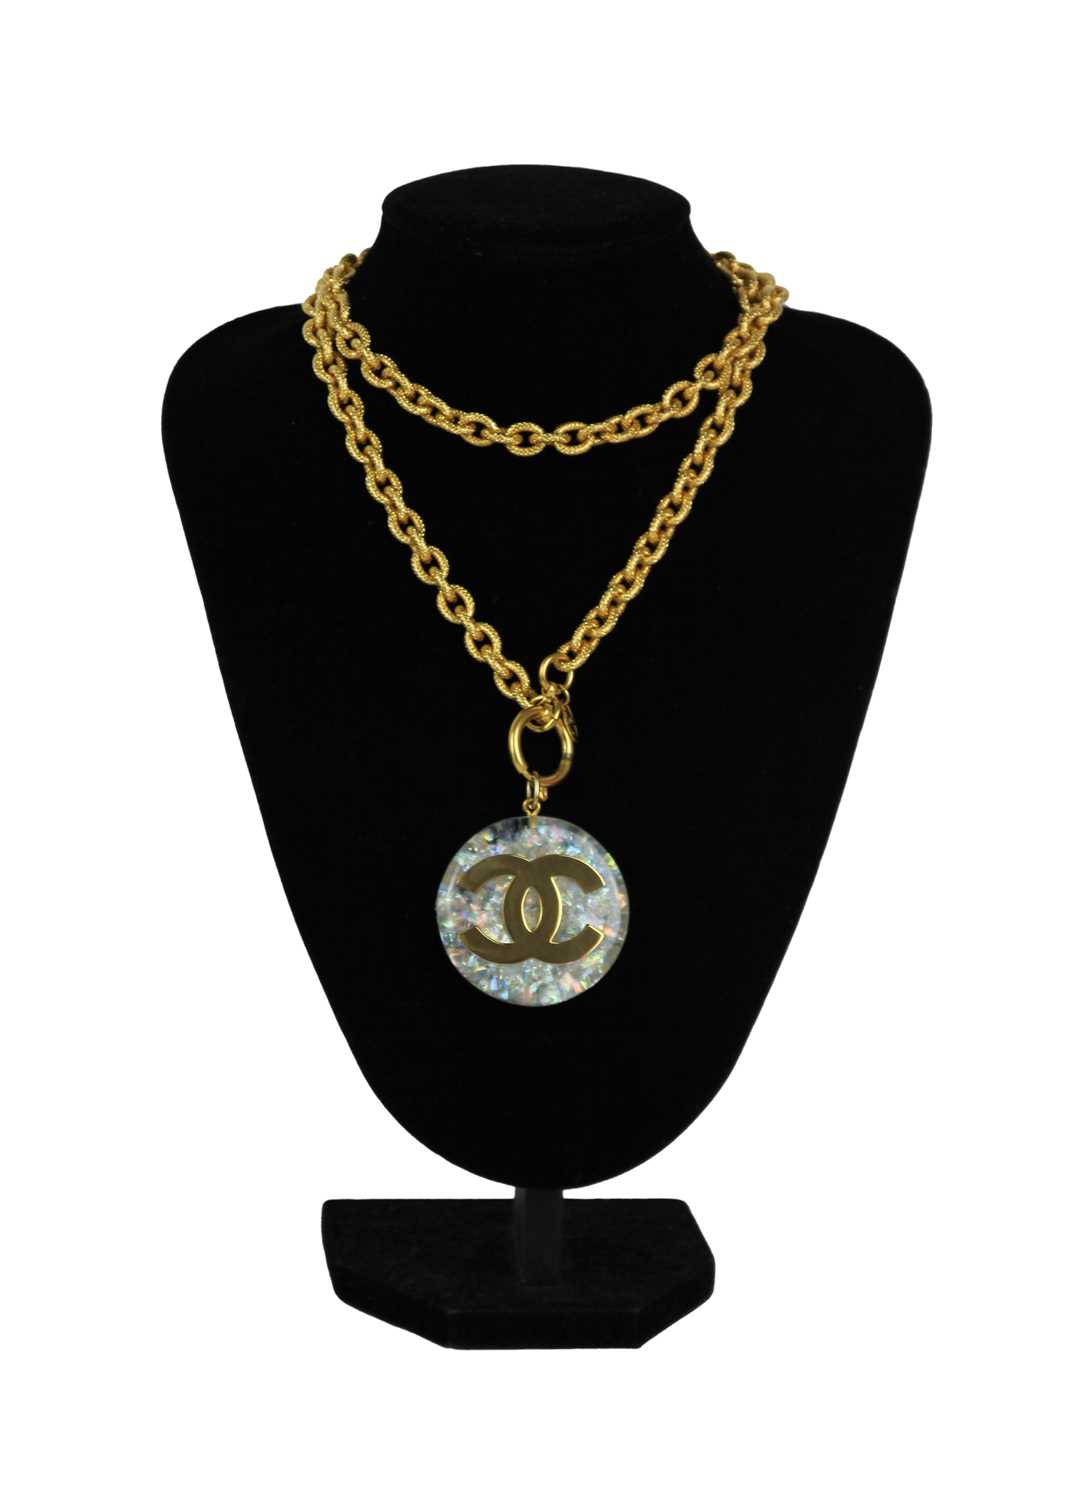 A Chanel 24ct gold-plated CC and opalescent resin medallion necklace, circa 1990/91. - Image 2 of 2